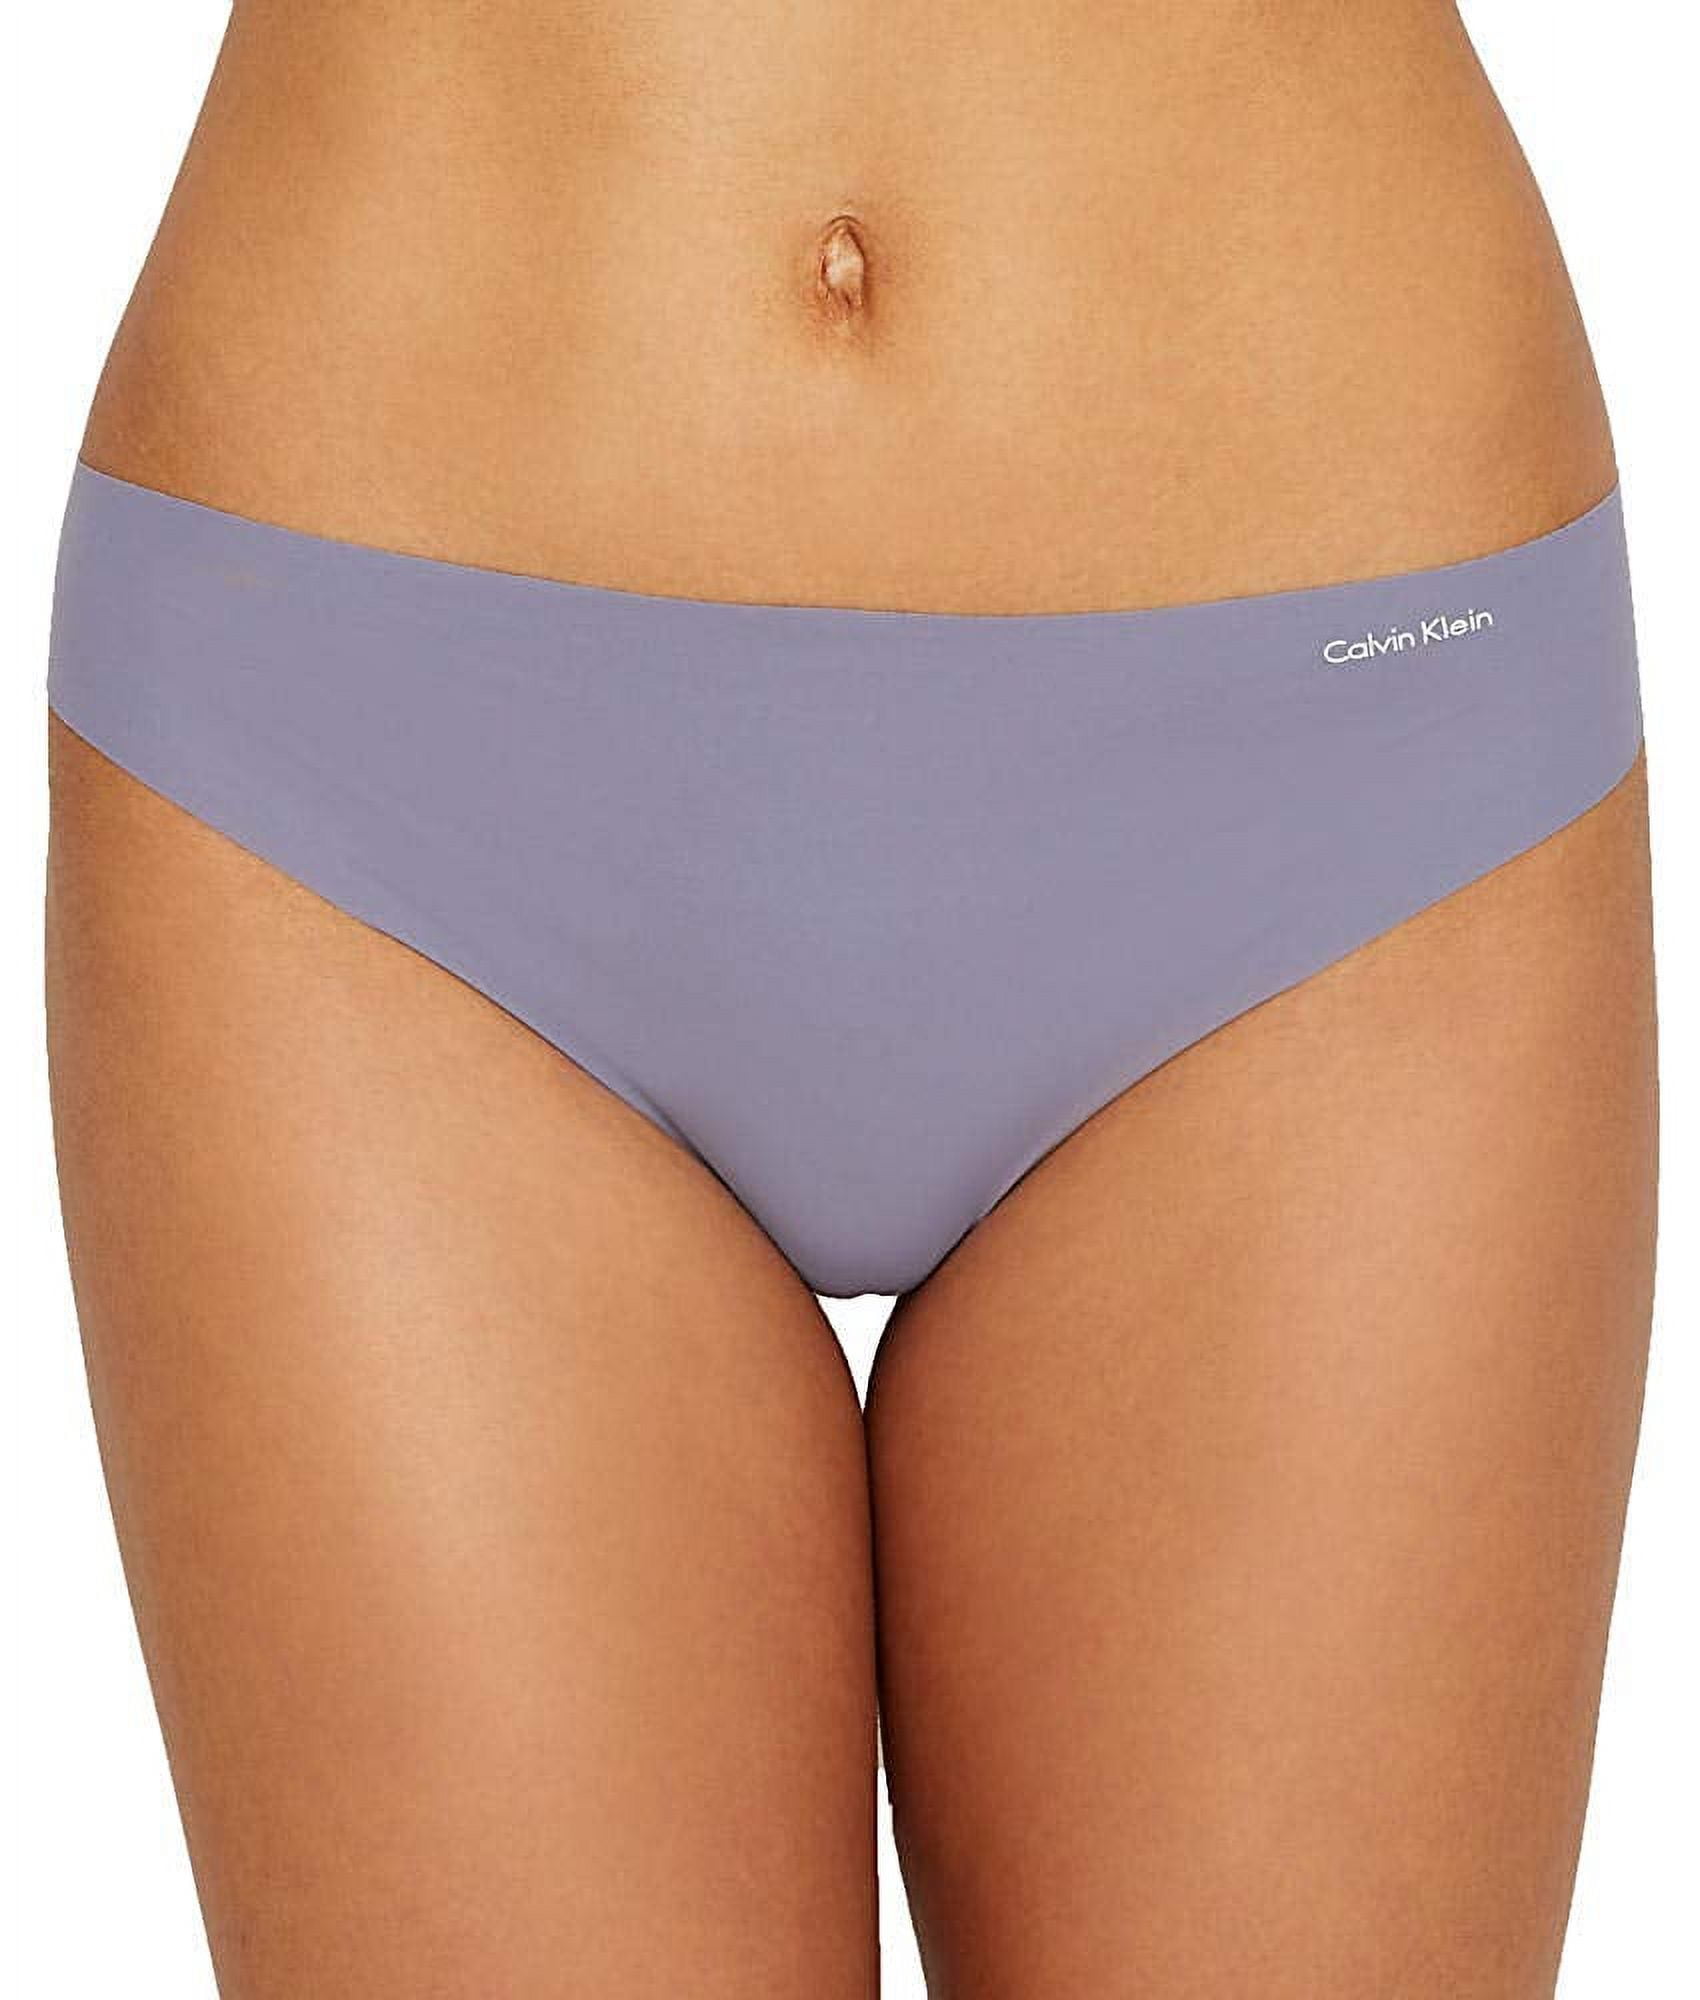 Calvin Klein Women's Invisibles Thong, Blue Granite XS - NEW